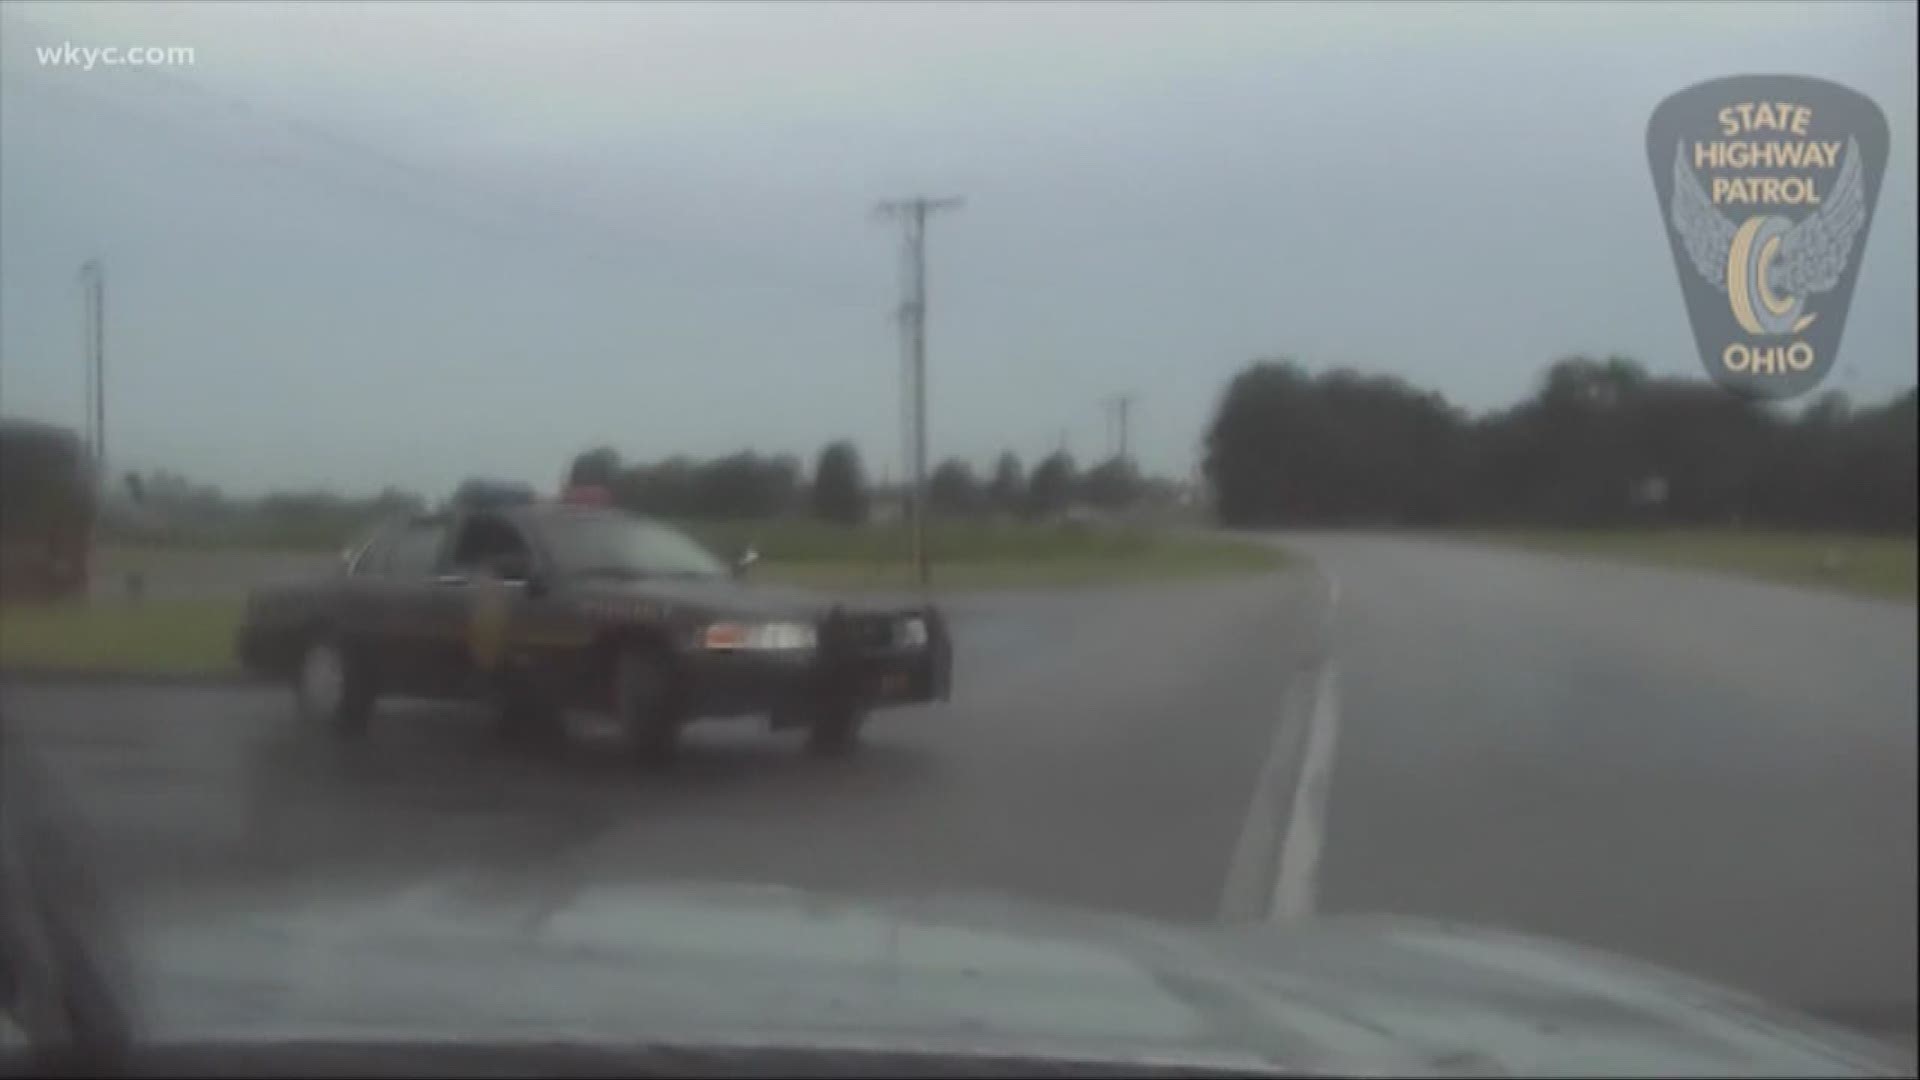 Dashcam video shows dangerous high speed chase after police cruiser stolen